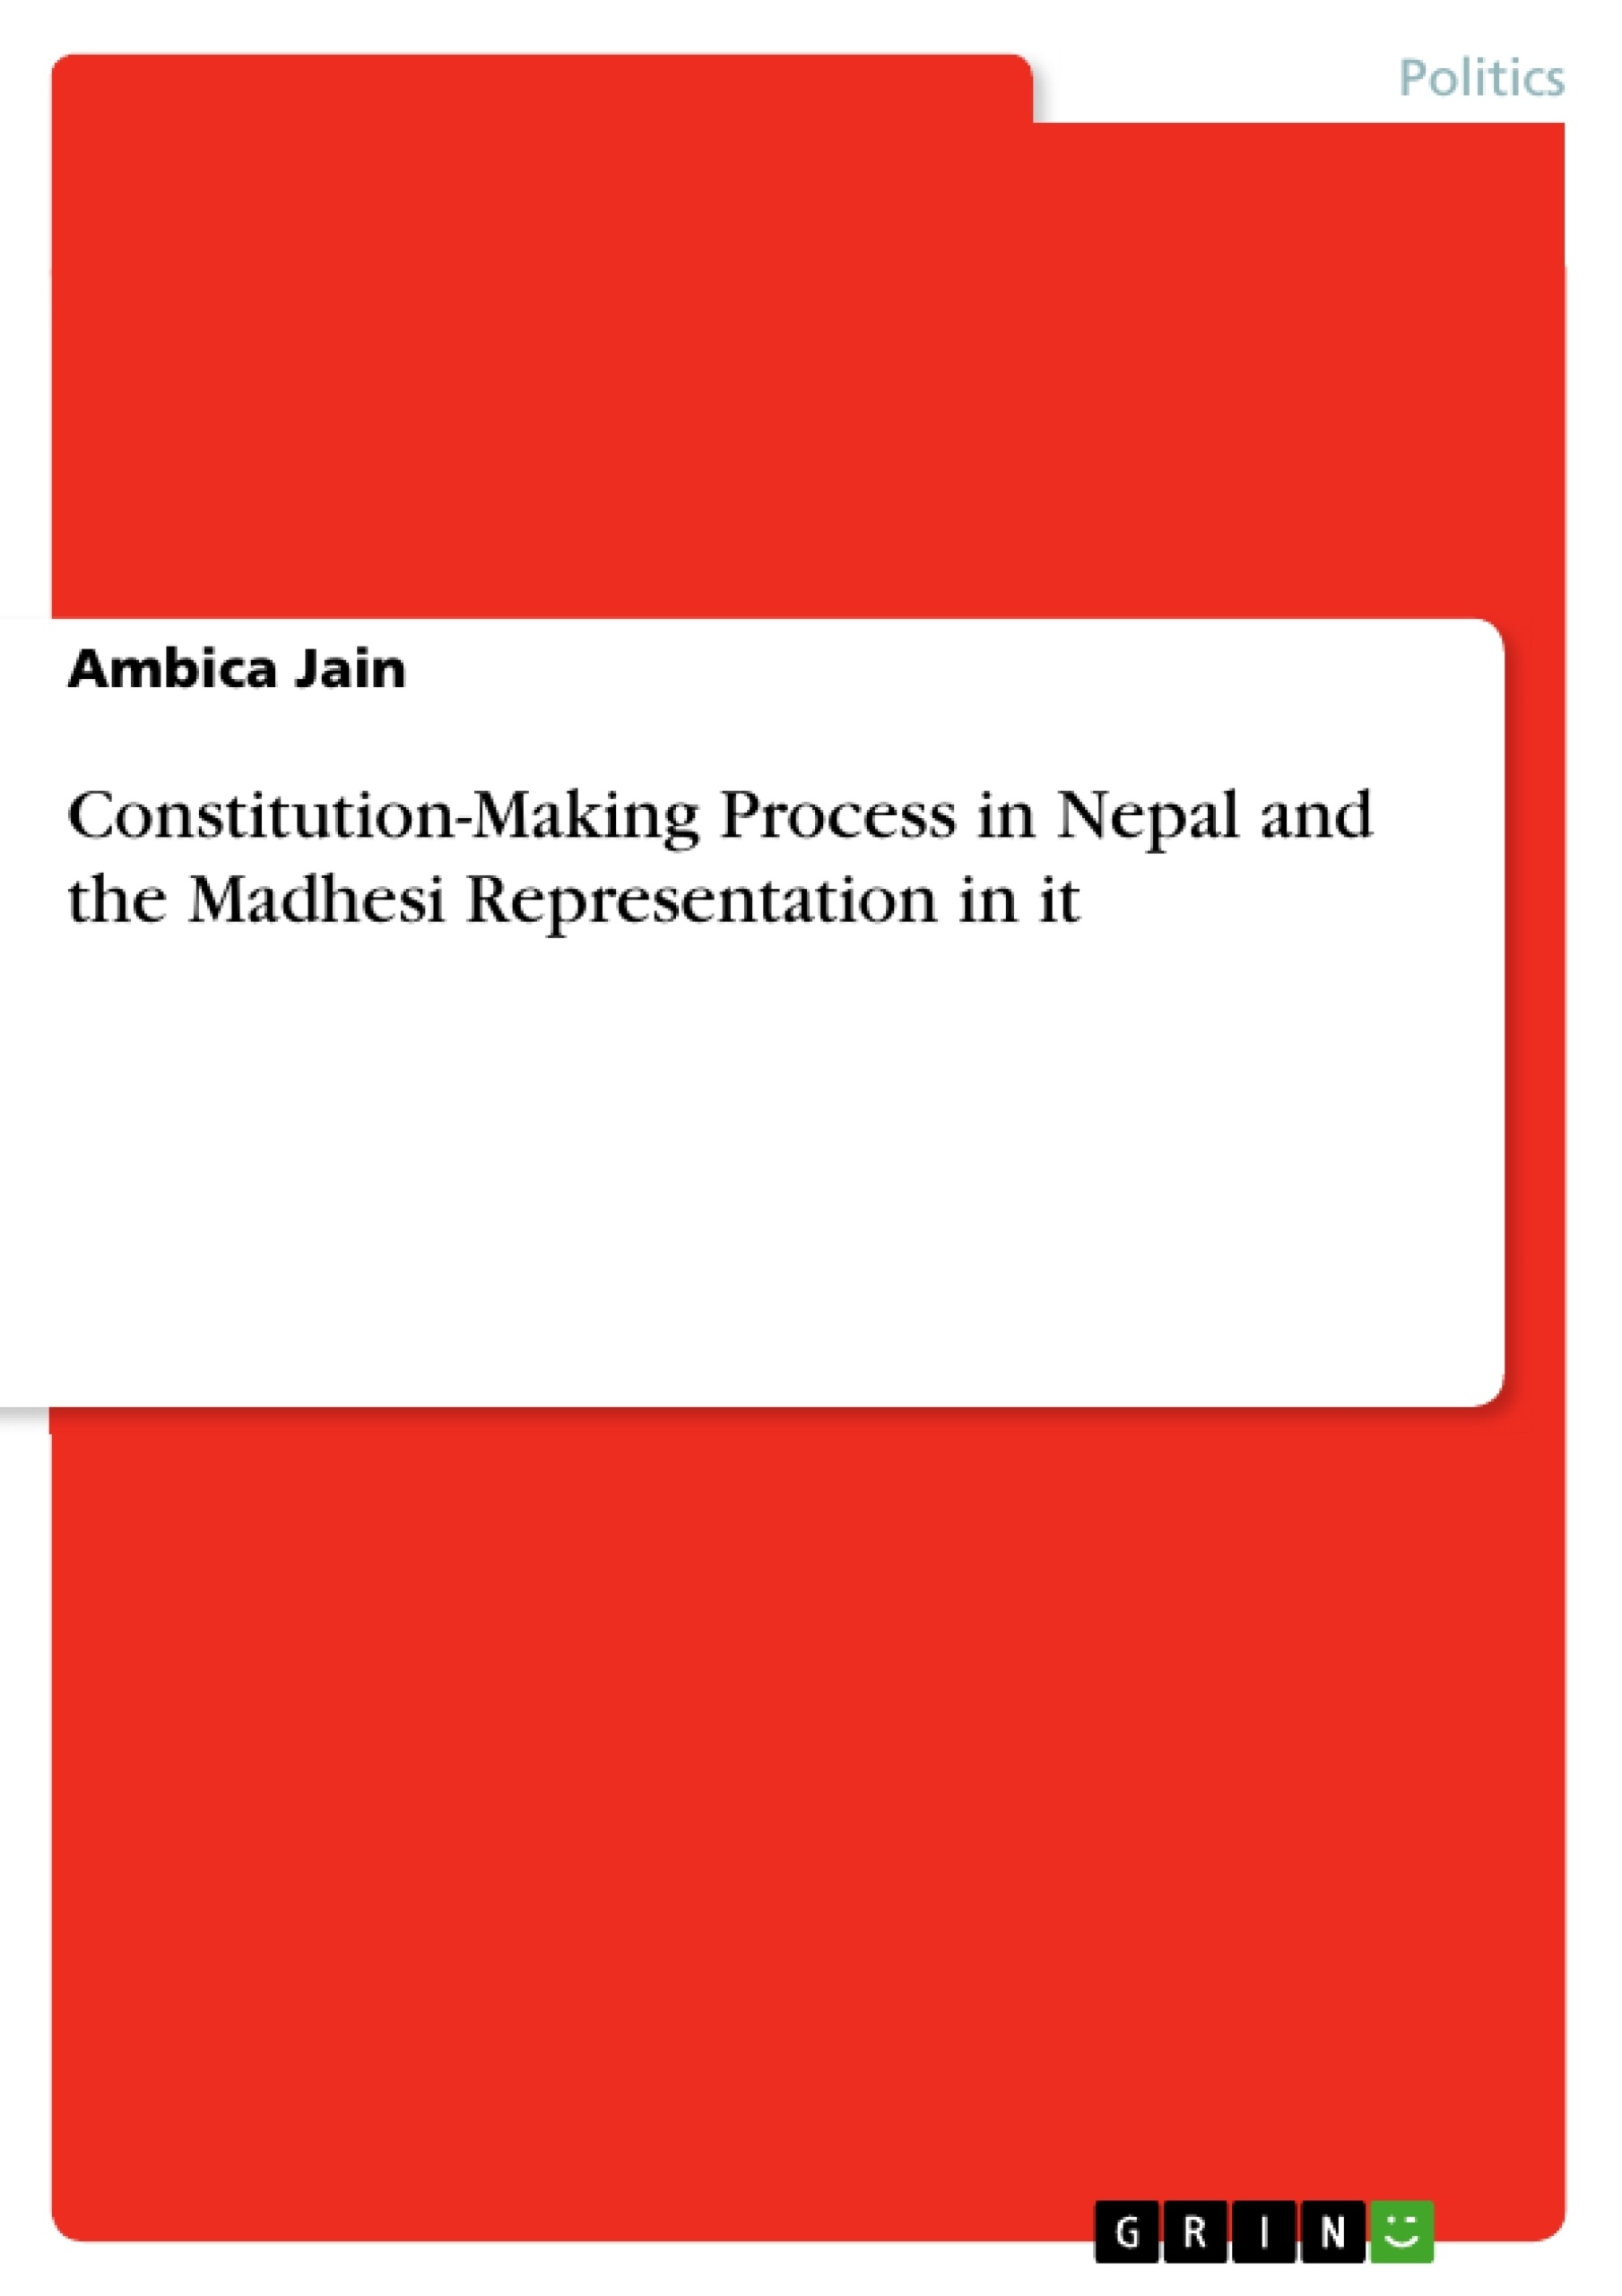 Título: Constitution-Making Process in Nepal and the Madhesi Representation in it